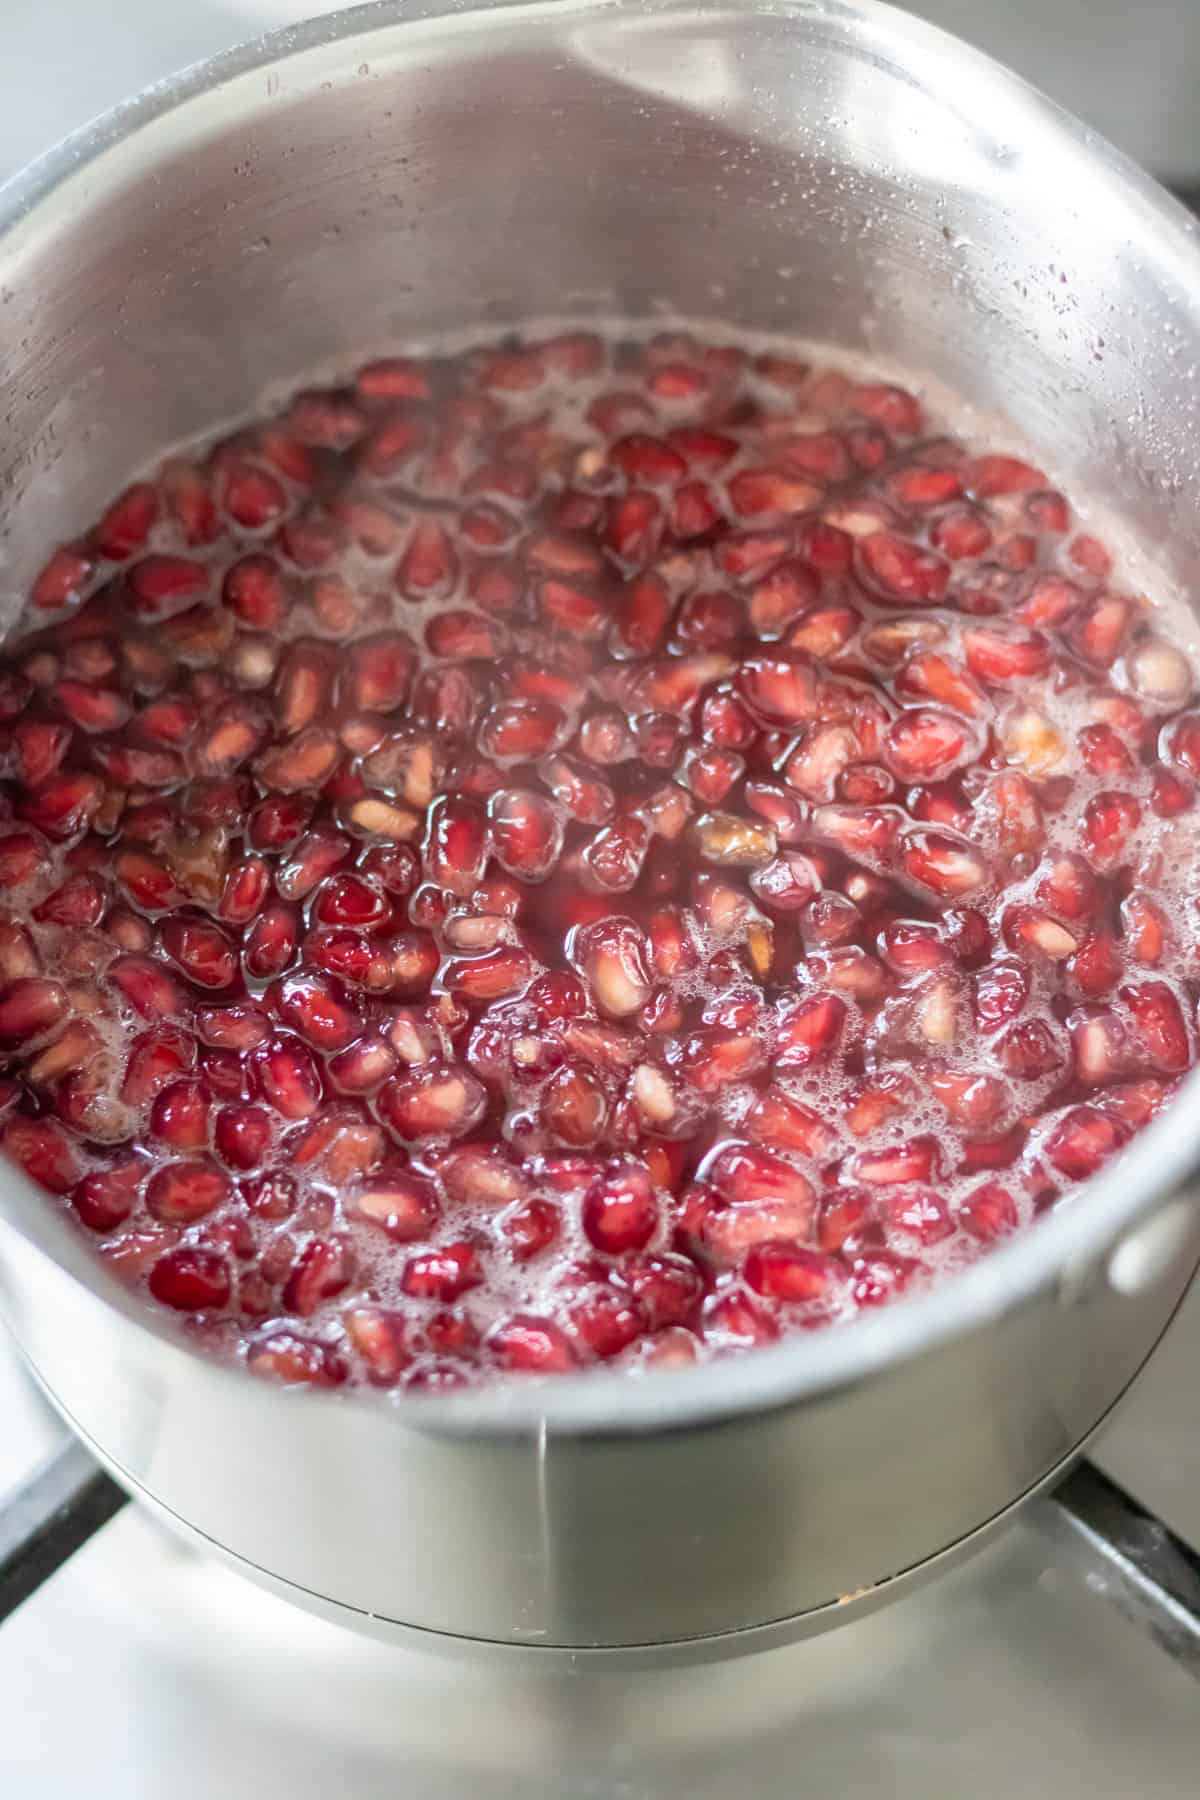 Simmering the pomegranate seeds, sugar and water in a pot to make the syrup.